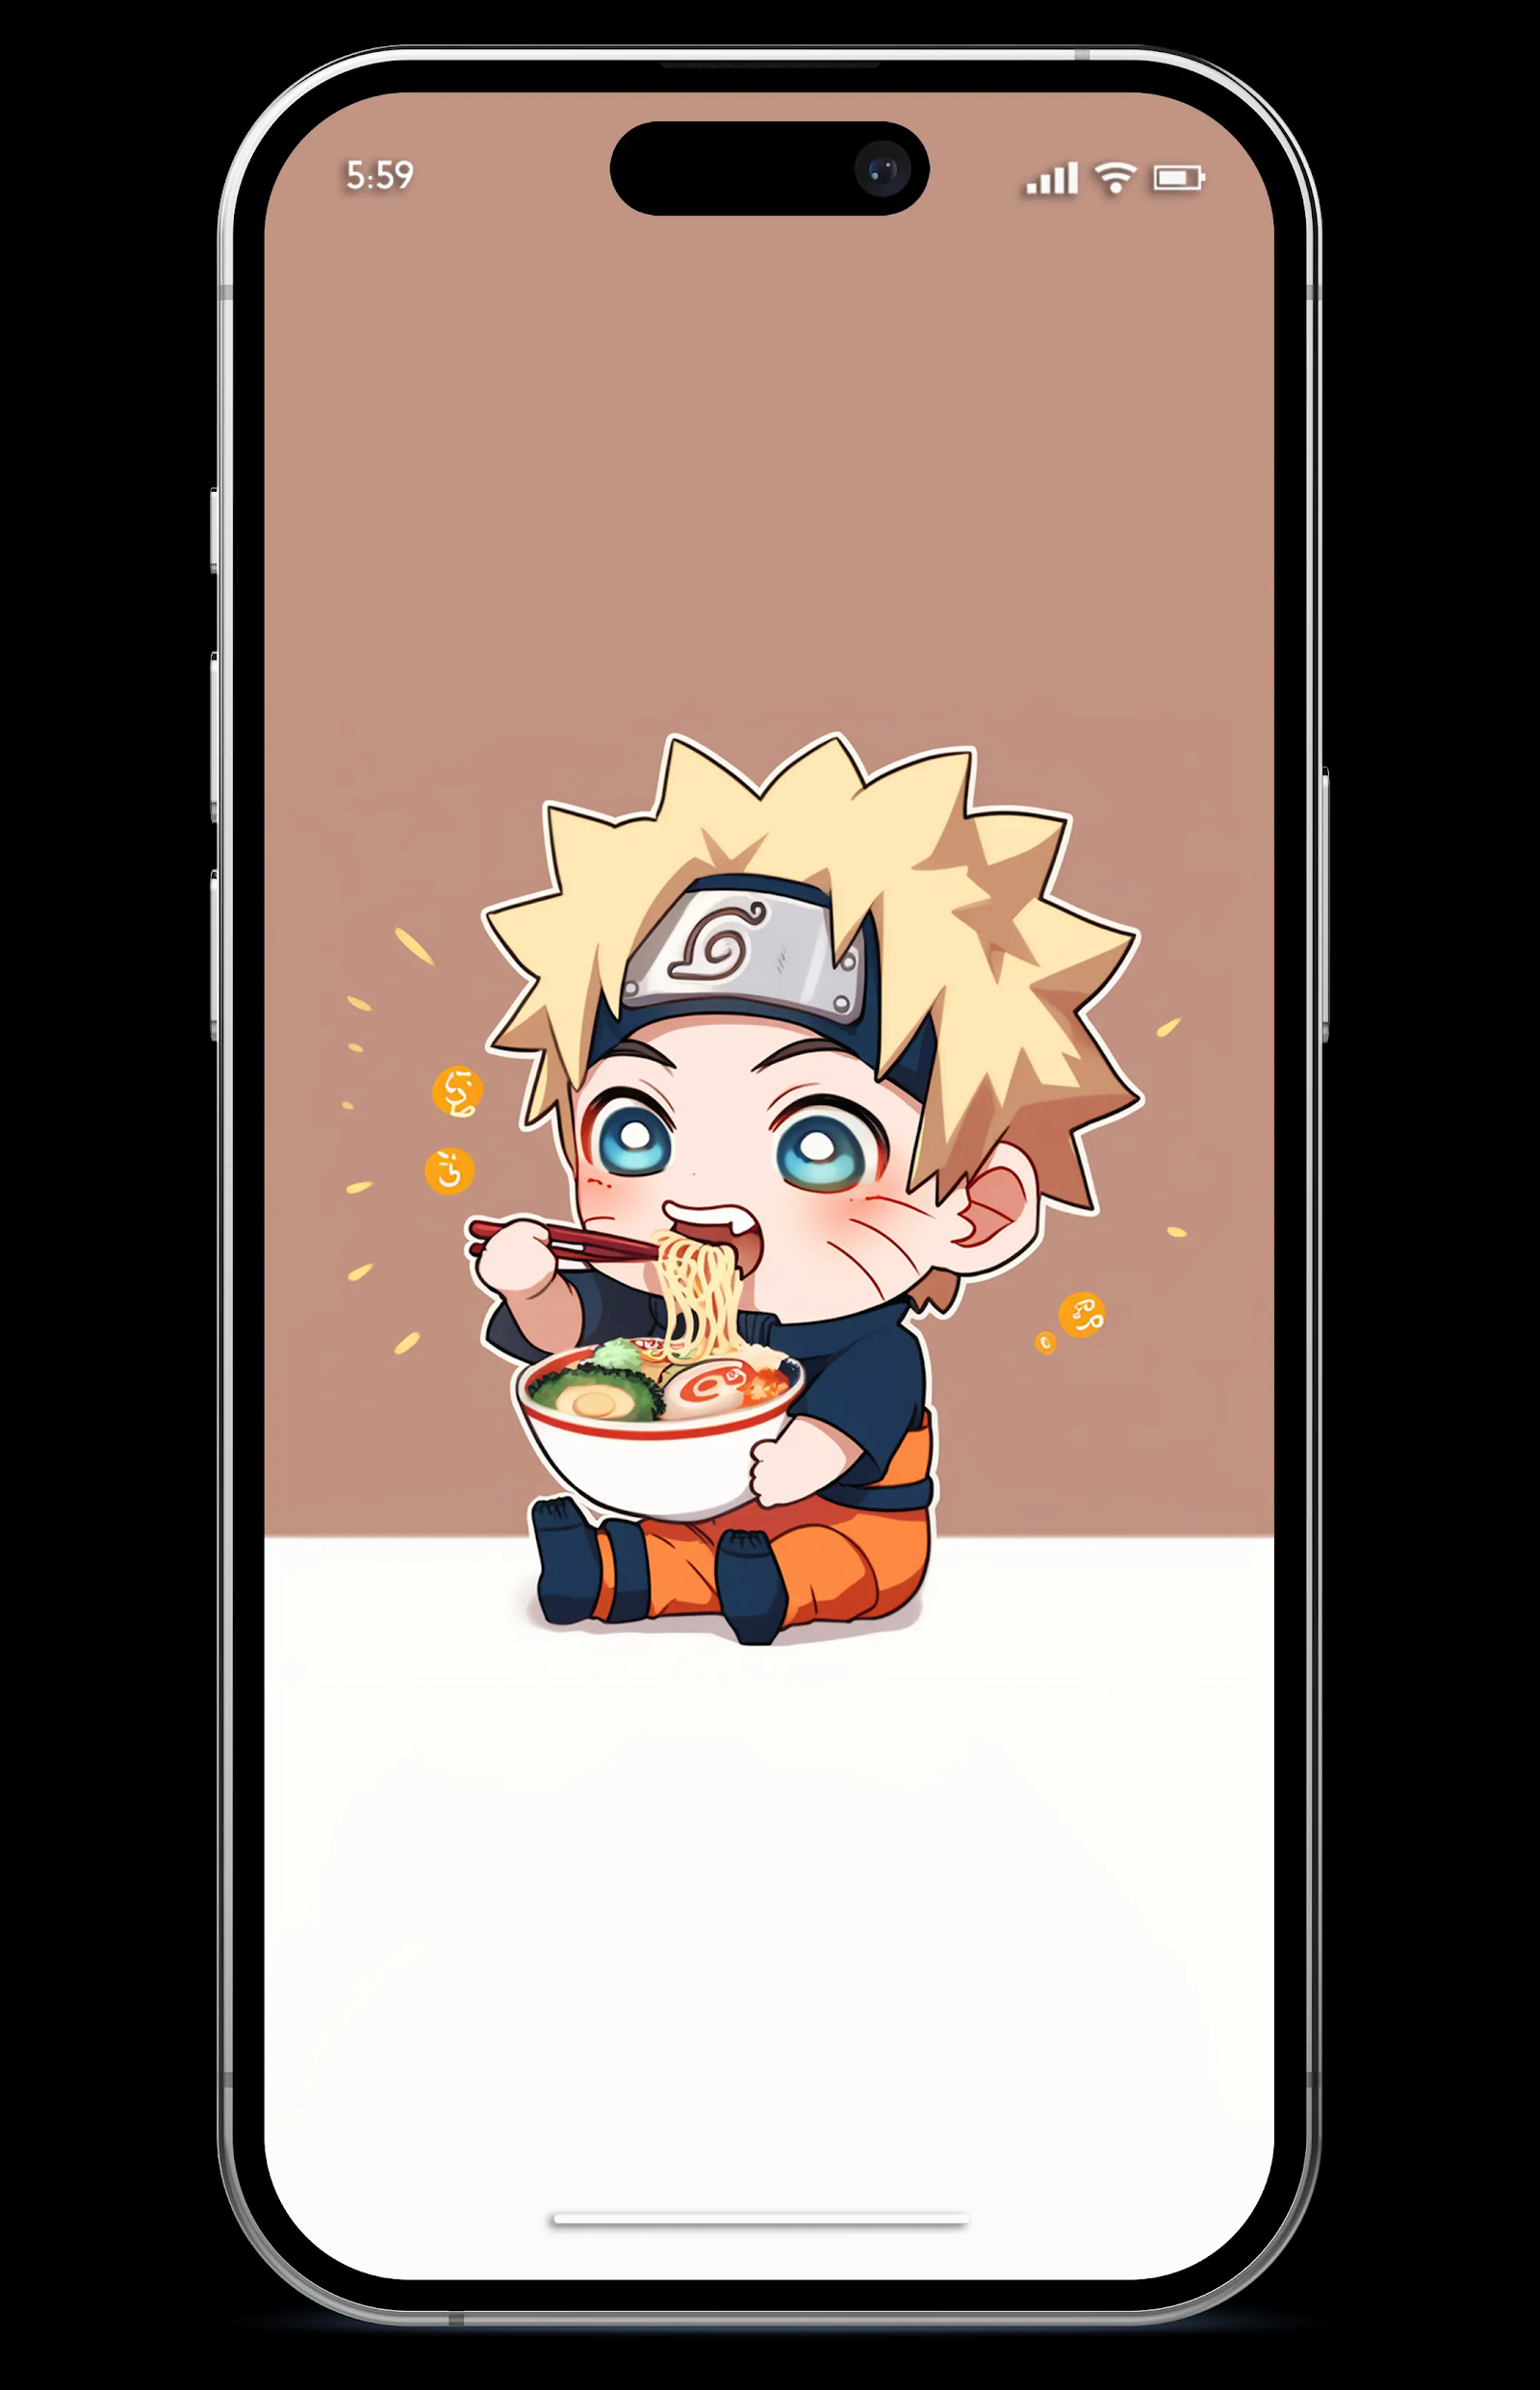 Naruto Archives - Live Desktop Wallpapers